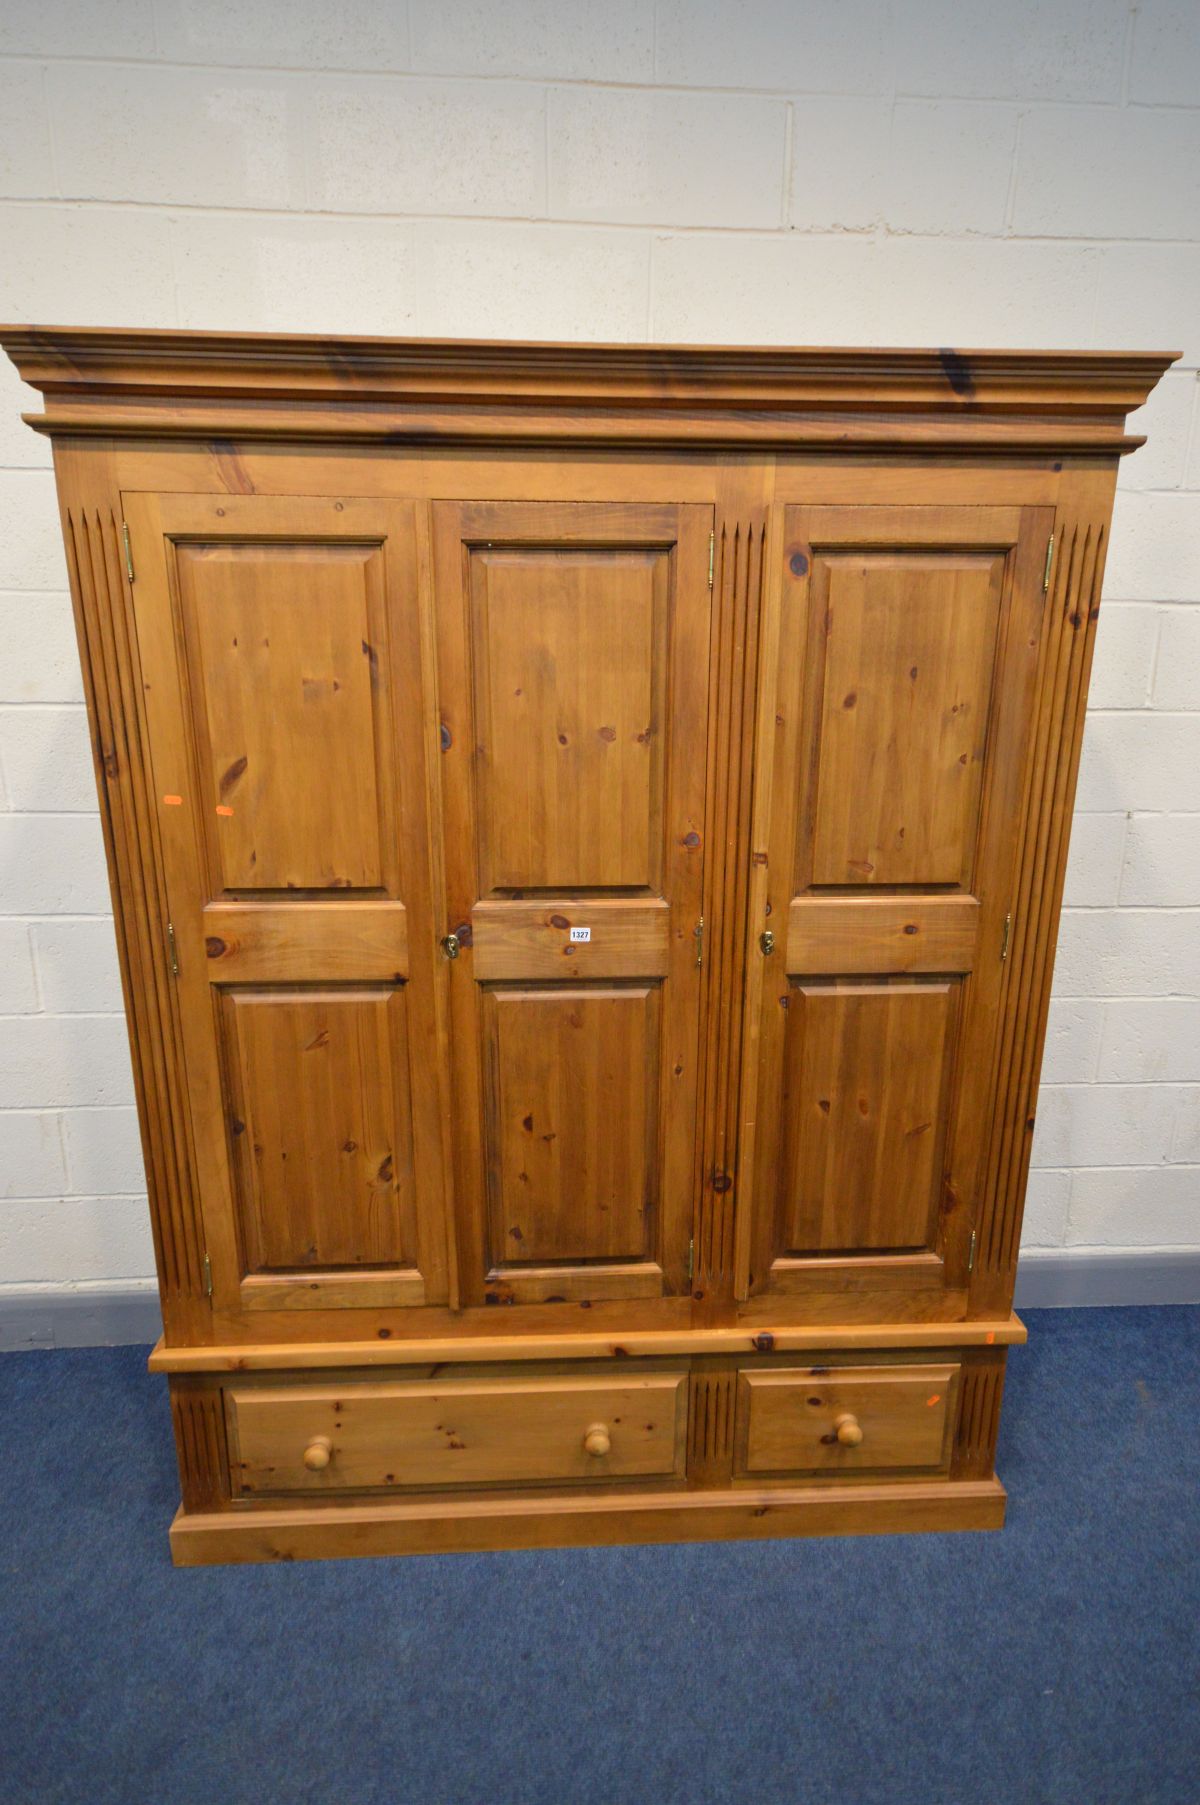 A PINE PANELLED THREE DOOR WARDROBE, with two drawers, width 161cm x 63cm x height 204cm (two keys)